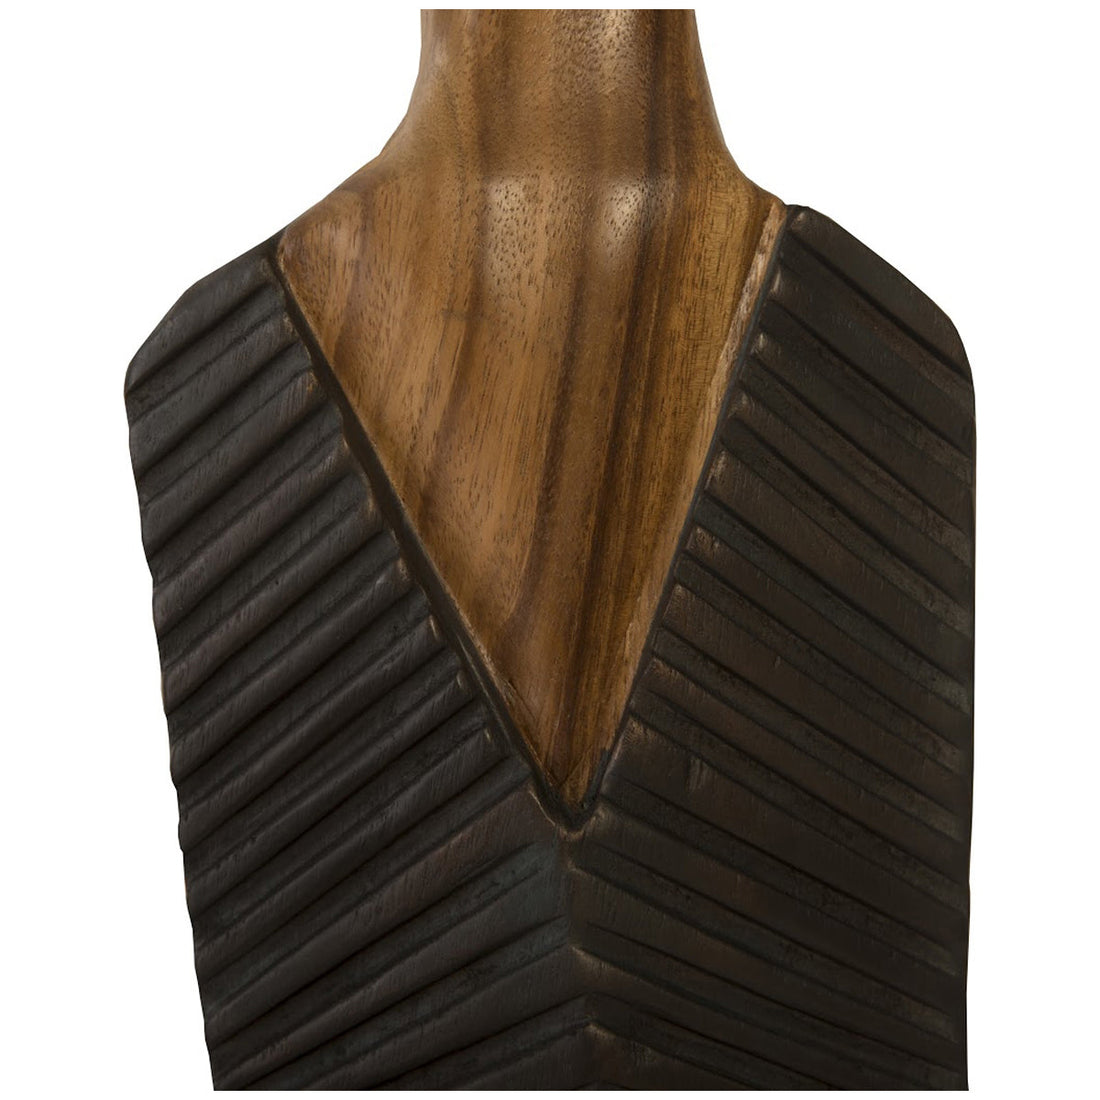 Phillips Collection Vested Male Sculpture, Medium